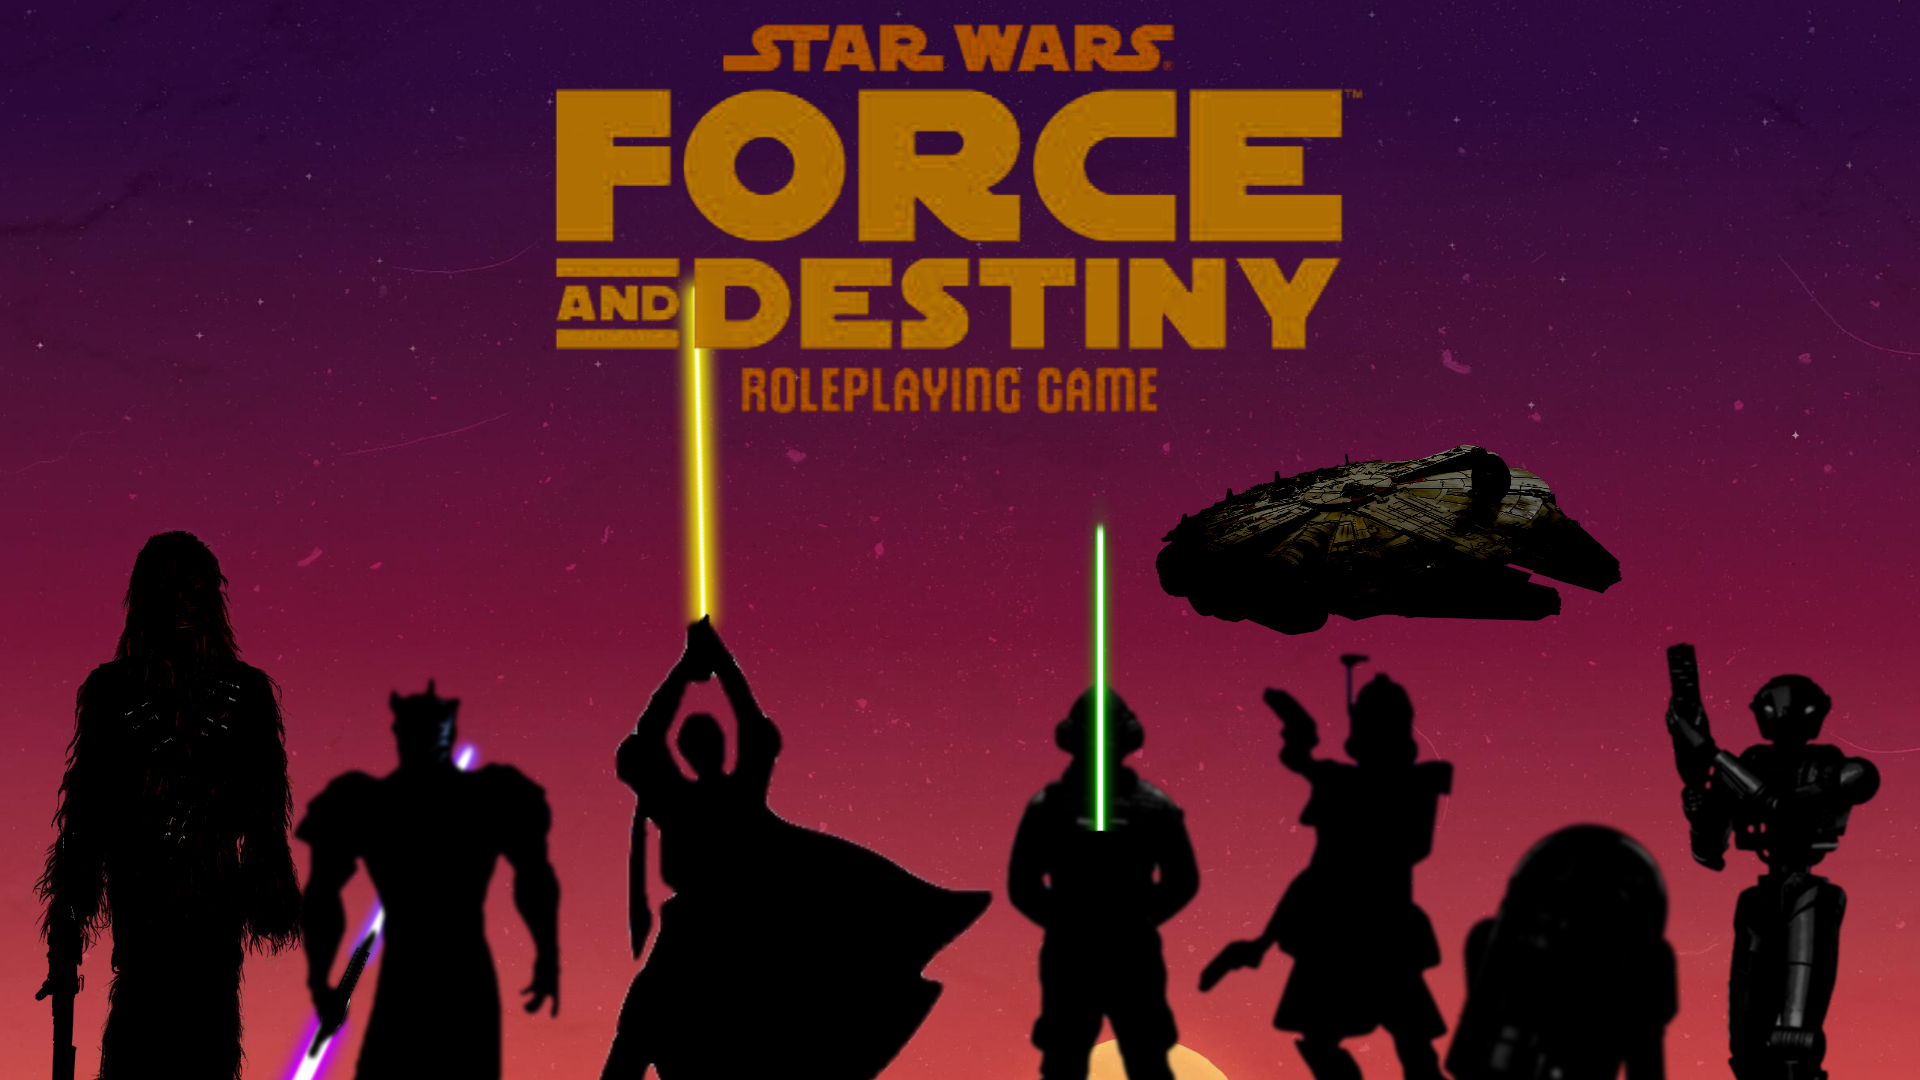 Star Wars: Force and Destiny. Edge, Age, Force, etc